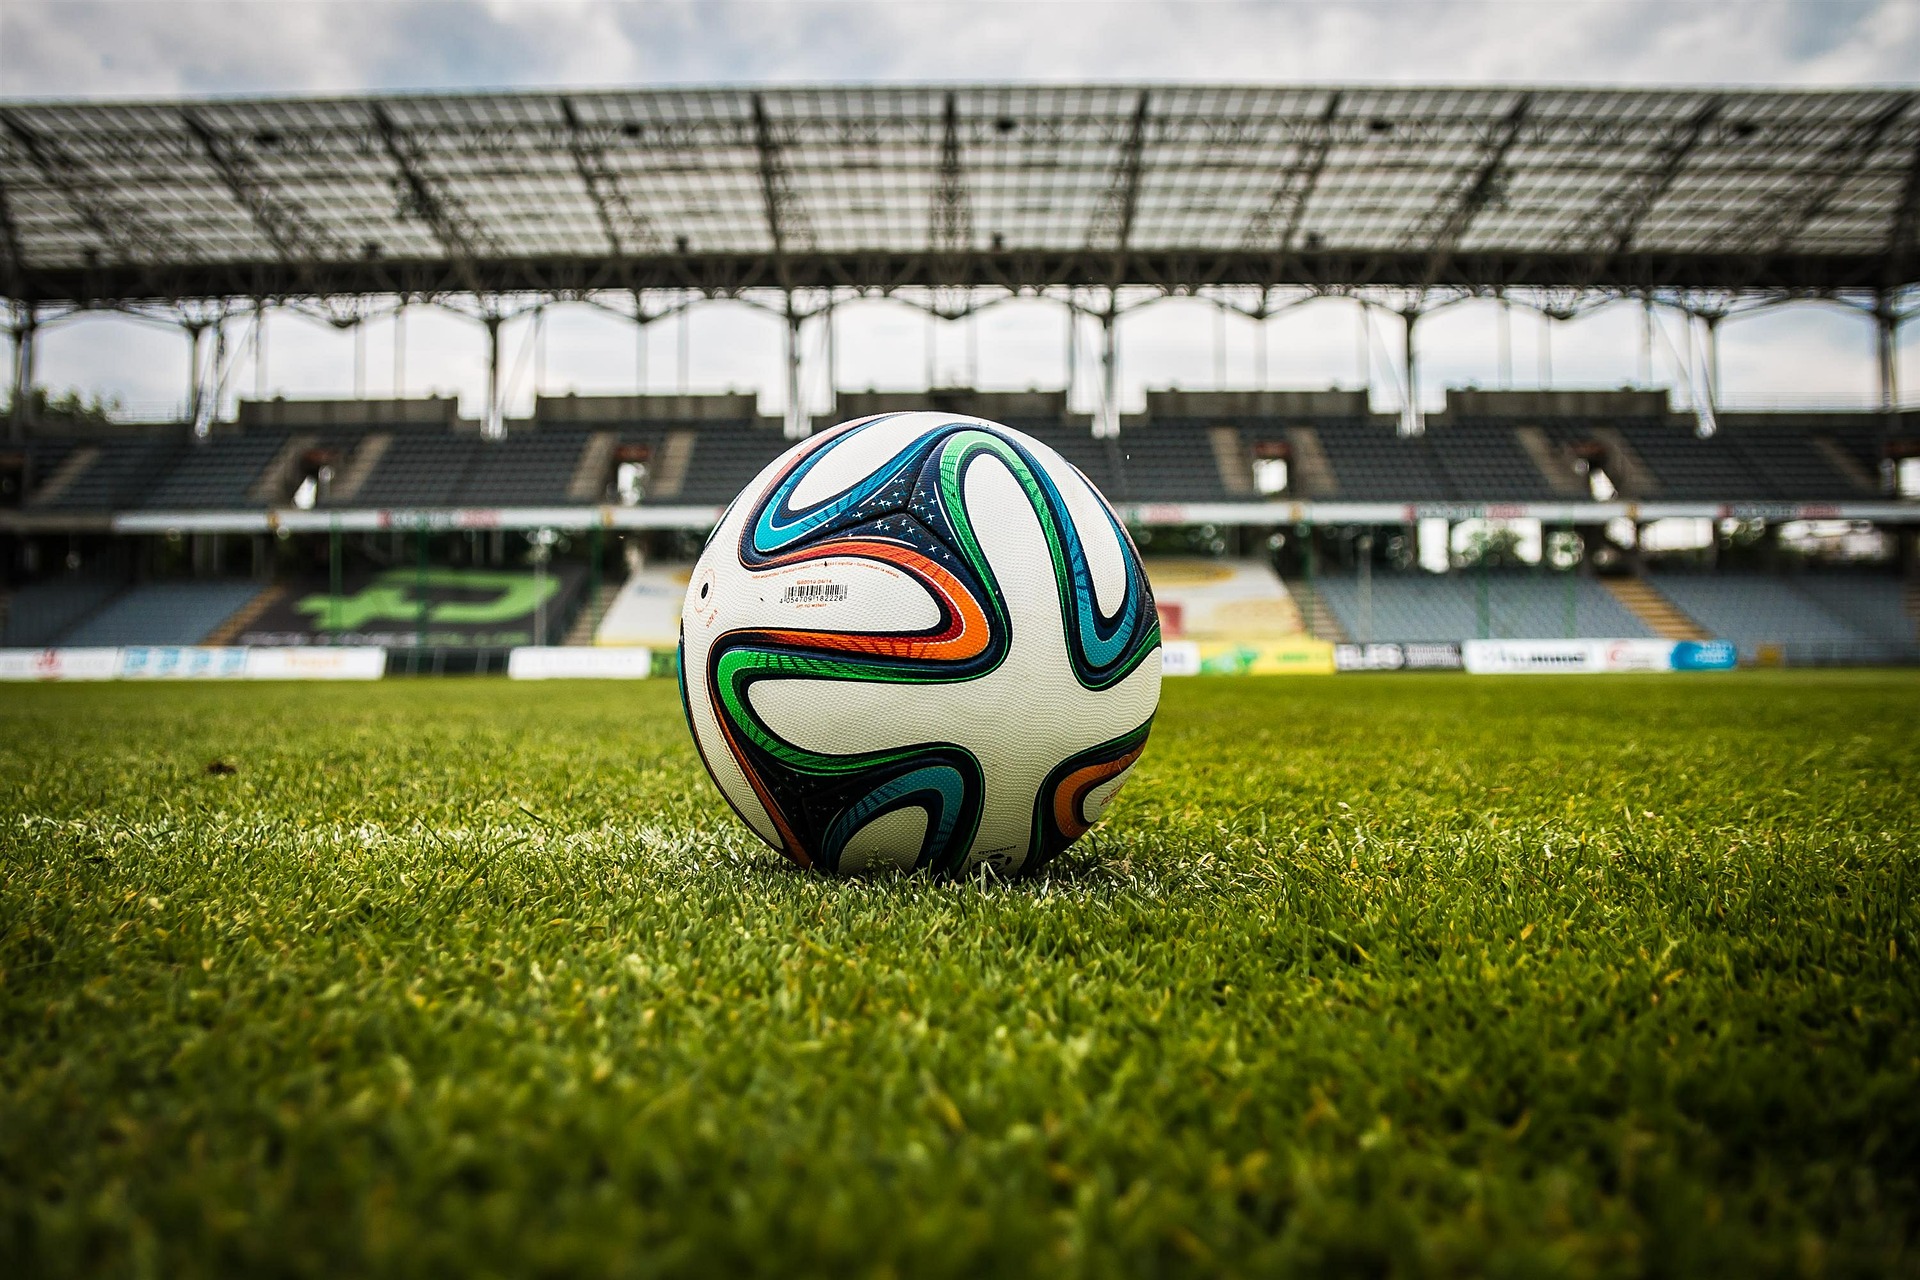 Improve Your Football Venue with These Tips